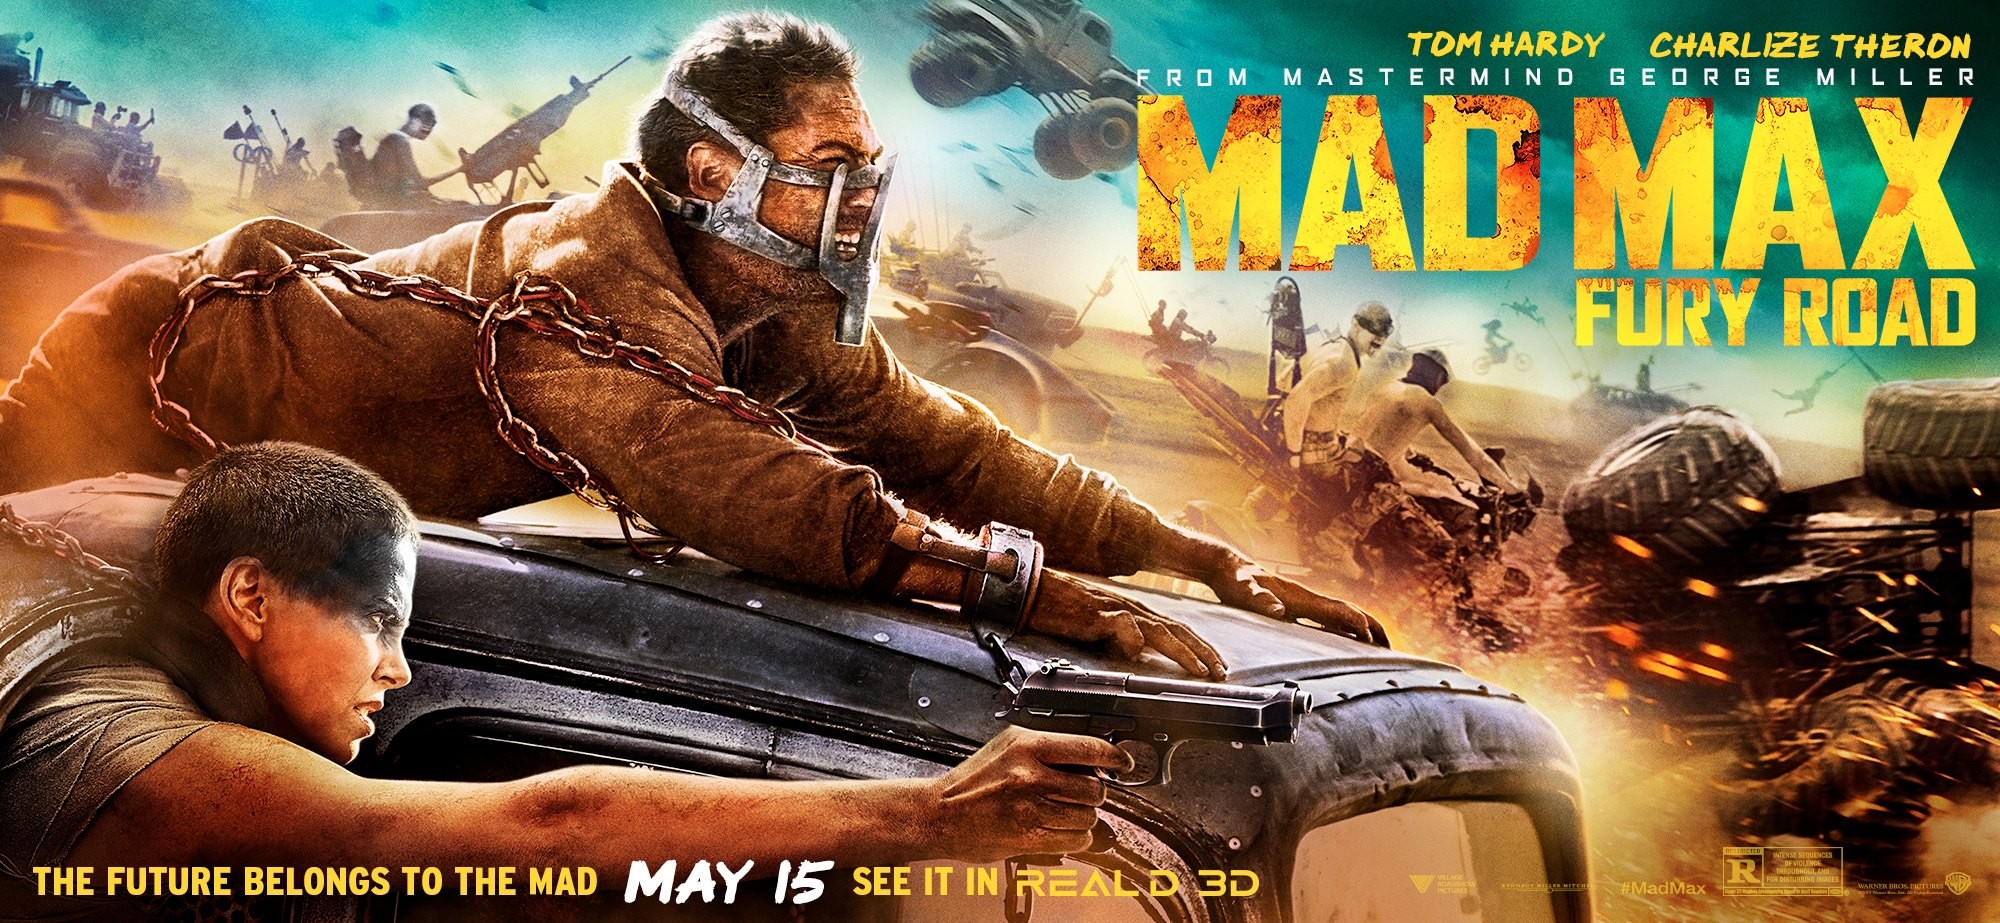 Mega Sized Movie Poster Image for Mad Max: Fury Road (#12 of 17)